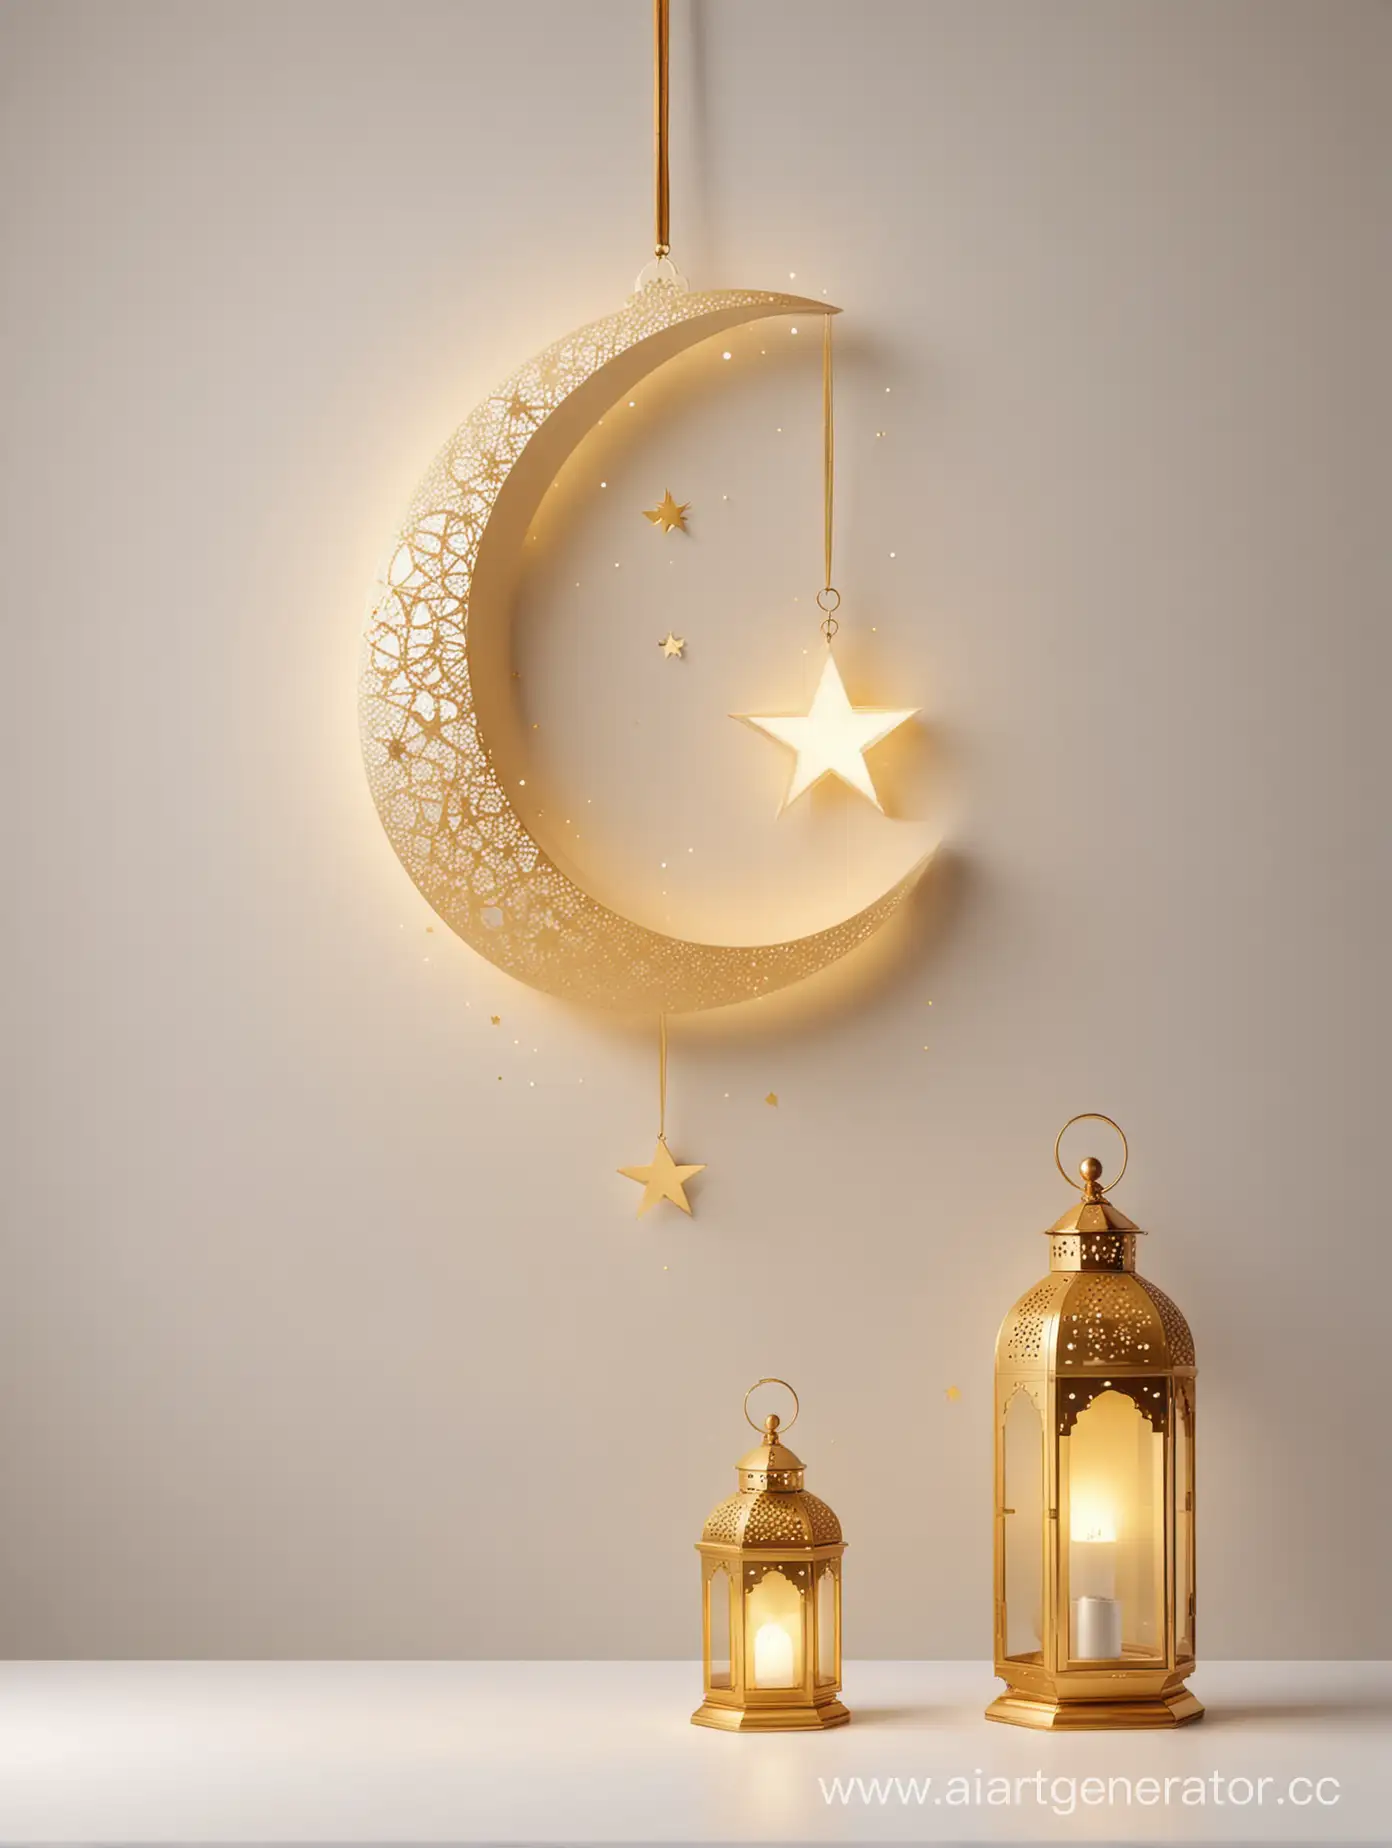 Modern-Islamic-Ramadan-Moon-Star-and-Lantern-Concept-on-Golden-and-White-Background